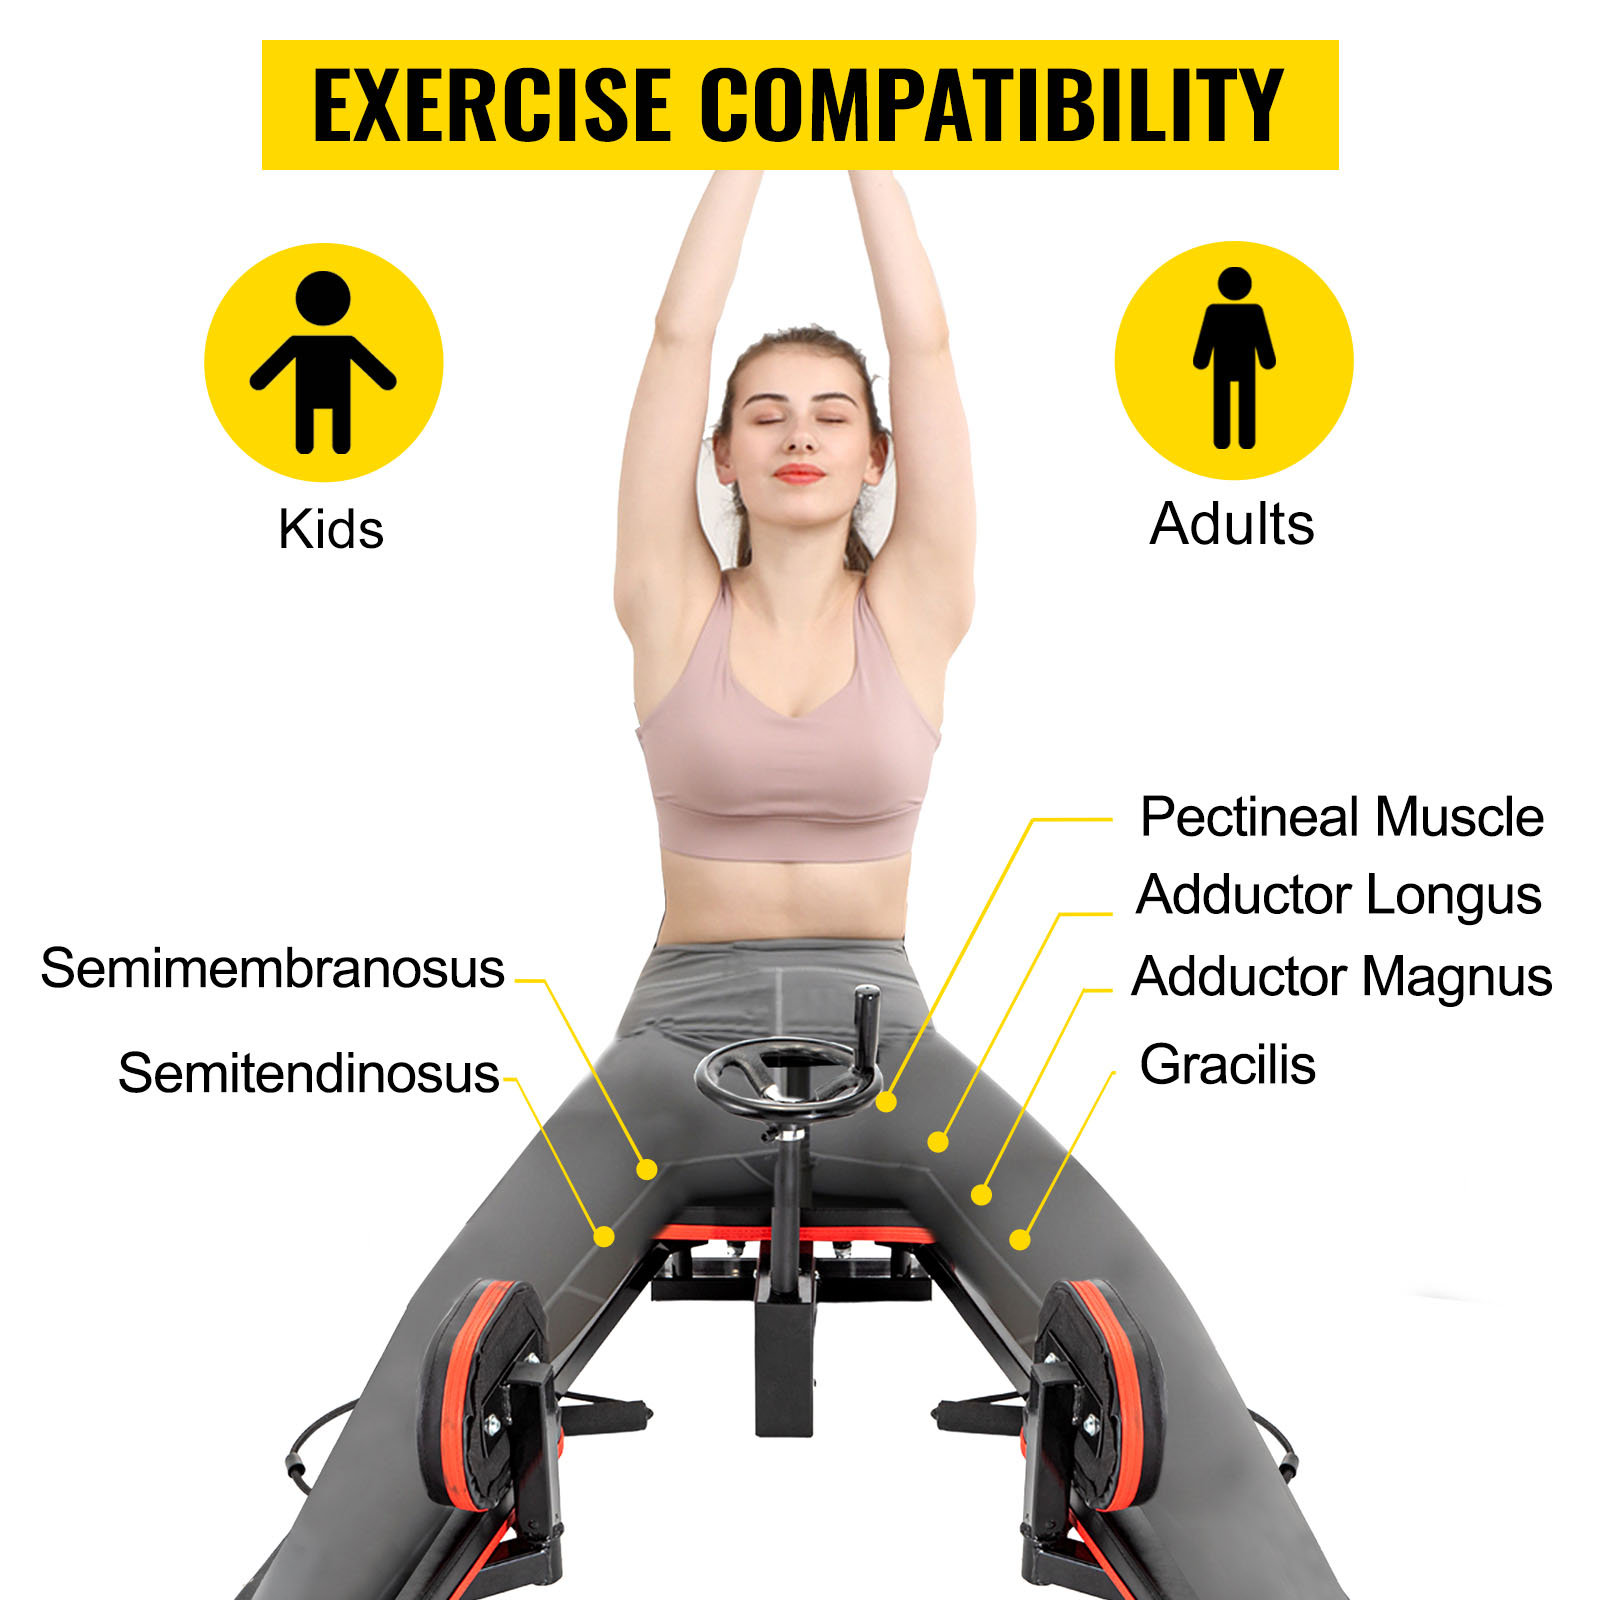 Deluxe Leg Stretcher Stretching Machine on Sale $189.95